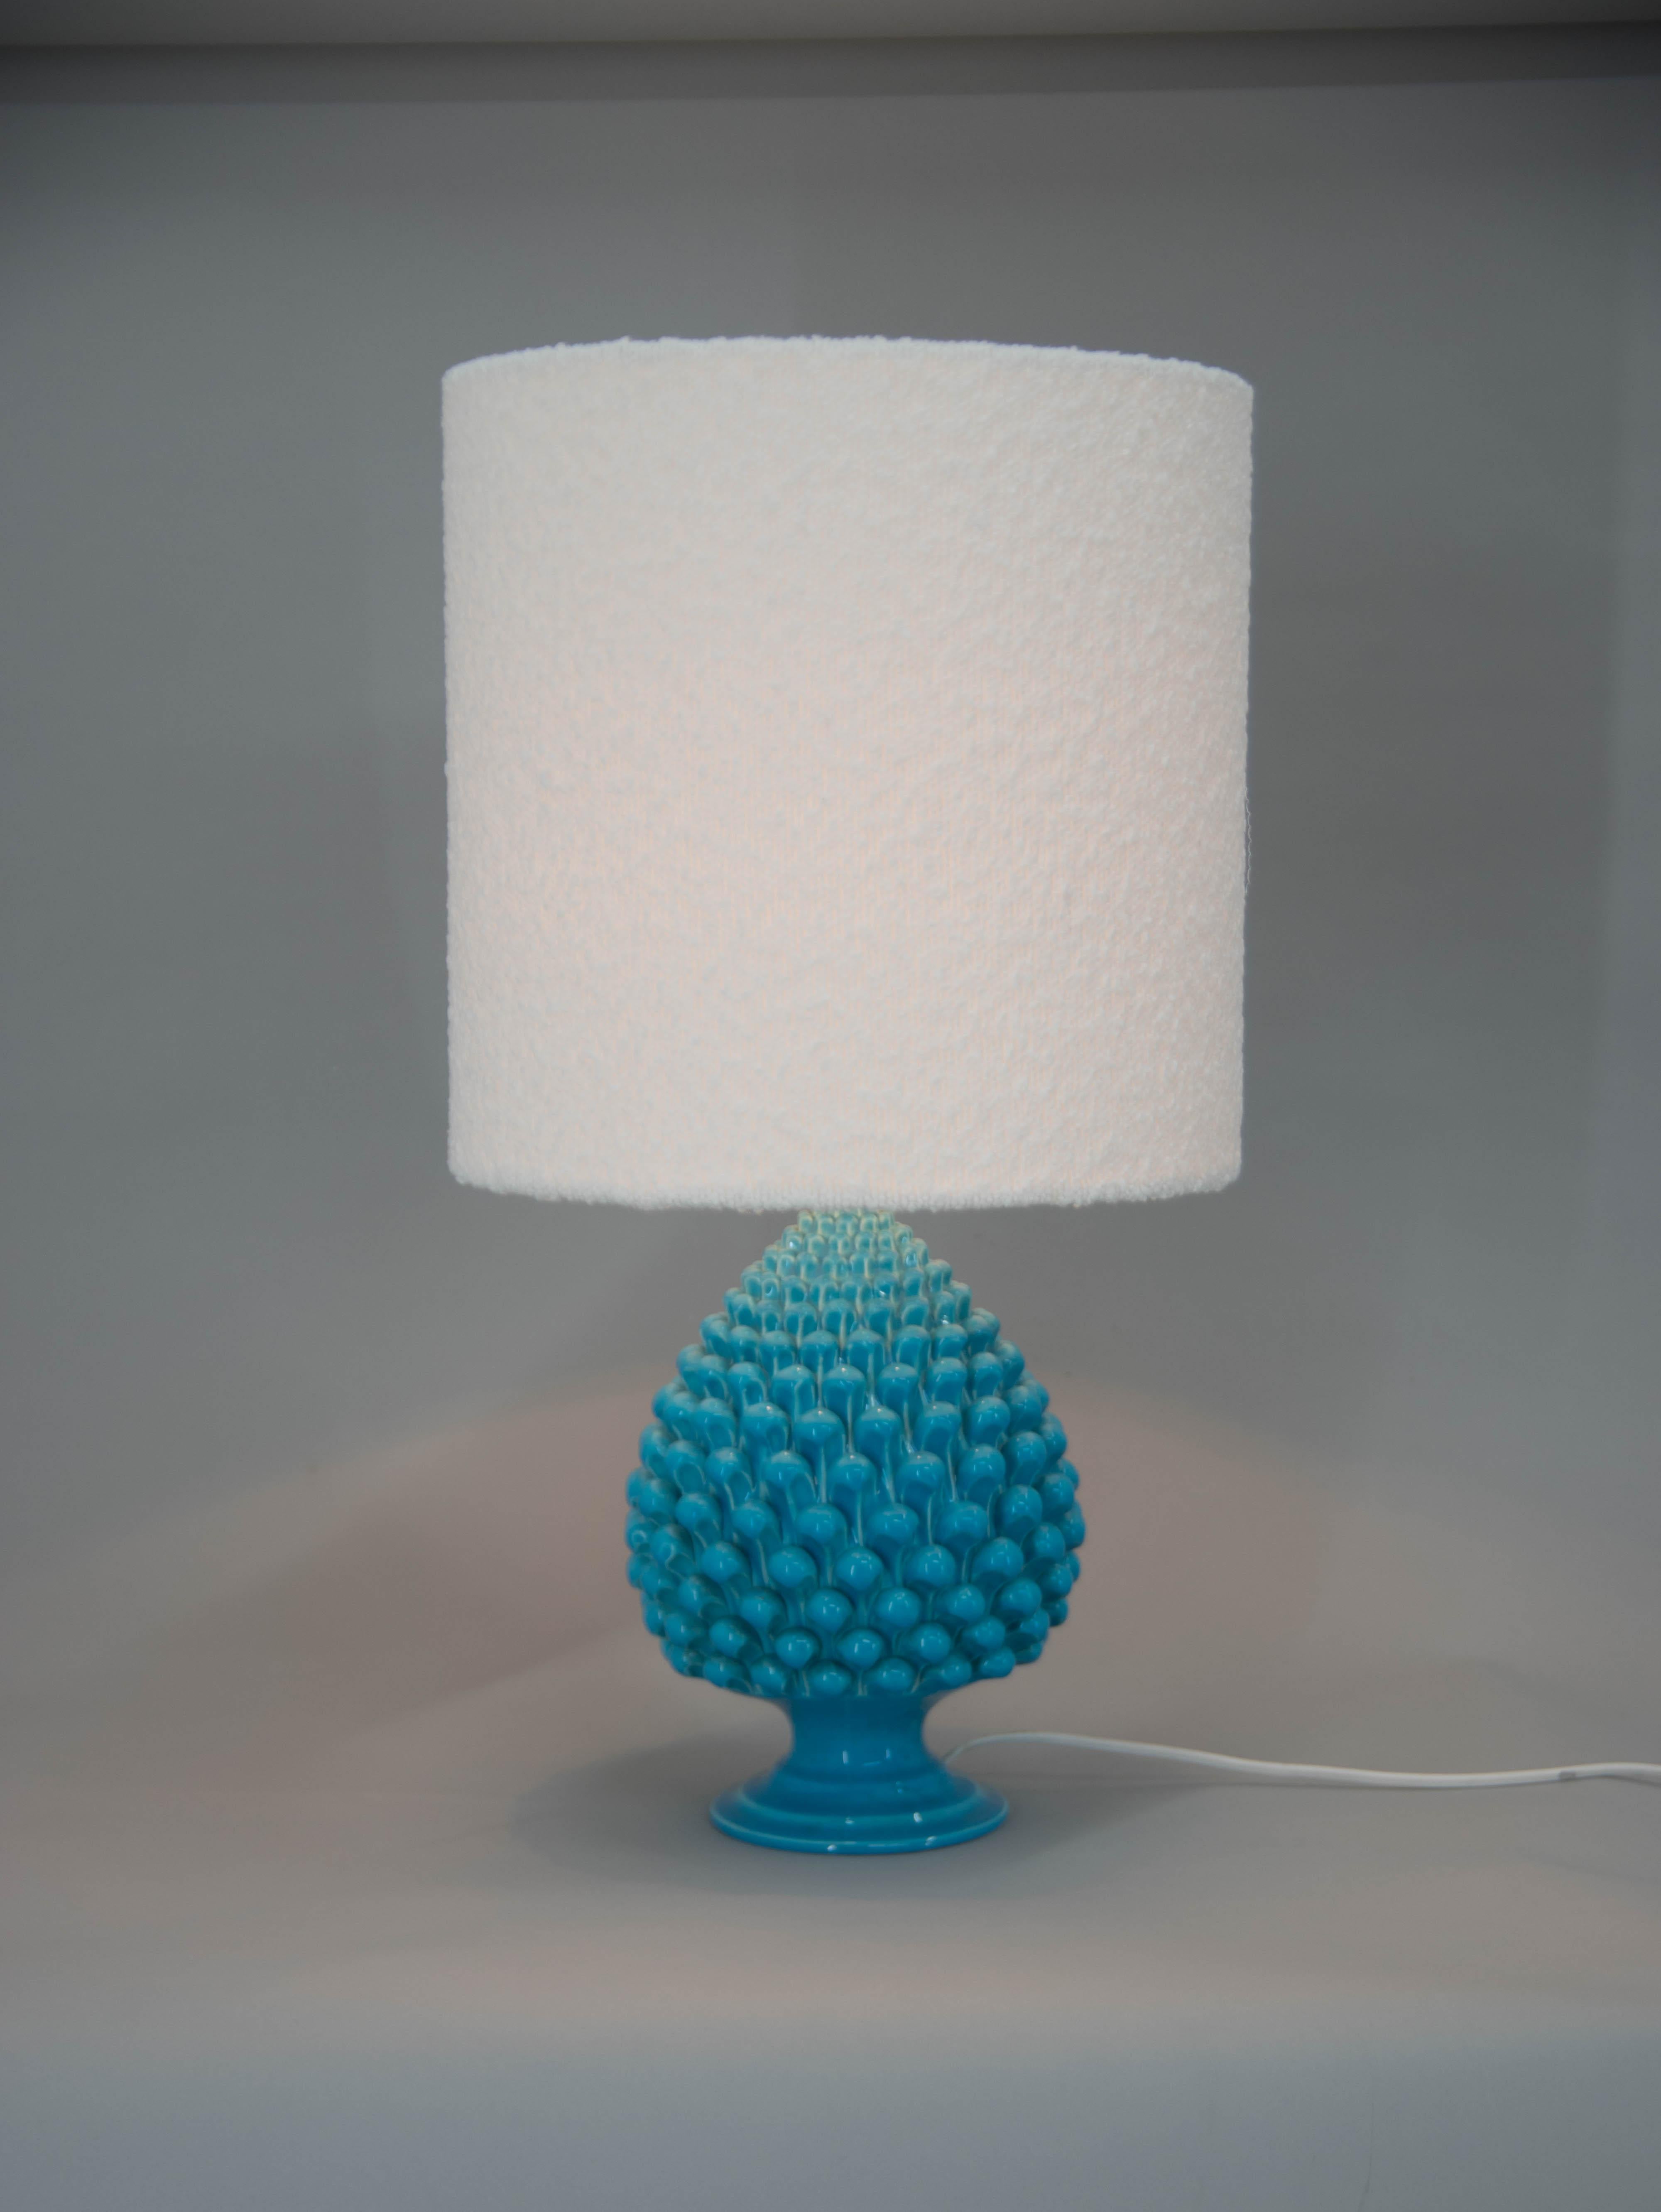 Big design table lamp with porcelain shade and new made fabric shade. 
1x60W, E25-E27 bulb.
US plug adapter included.